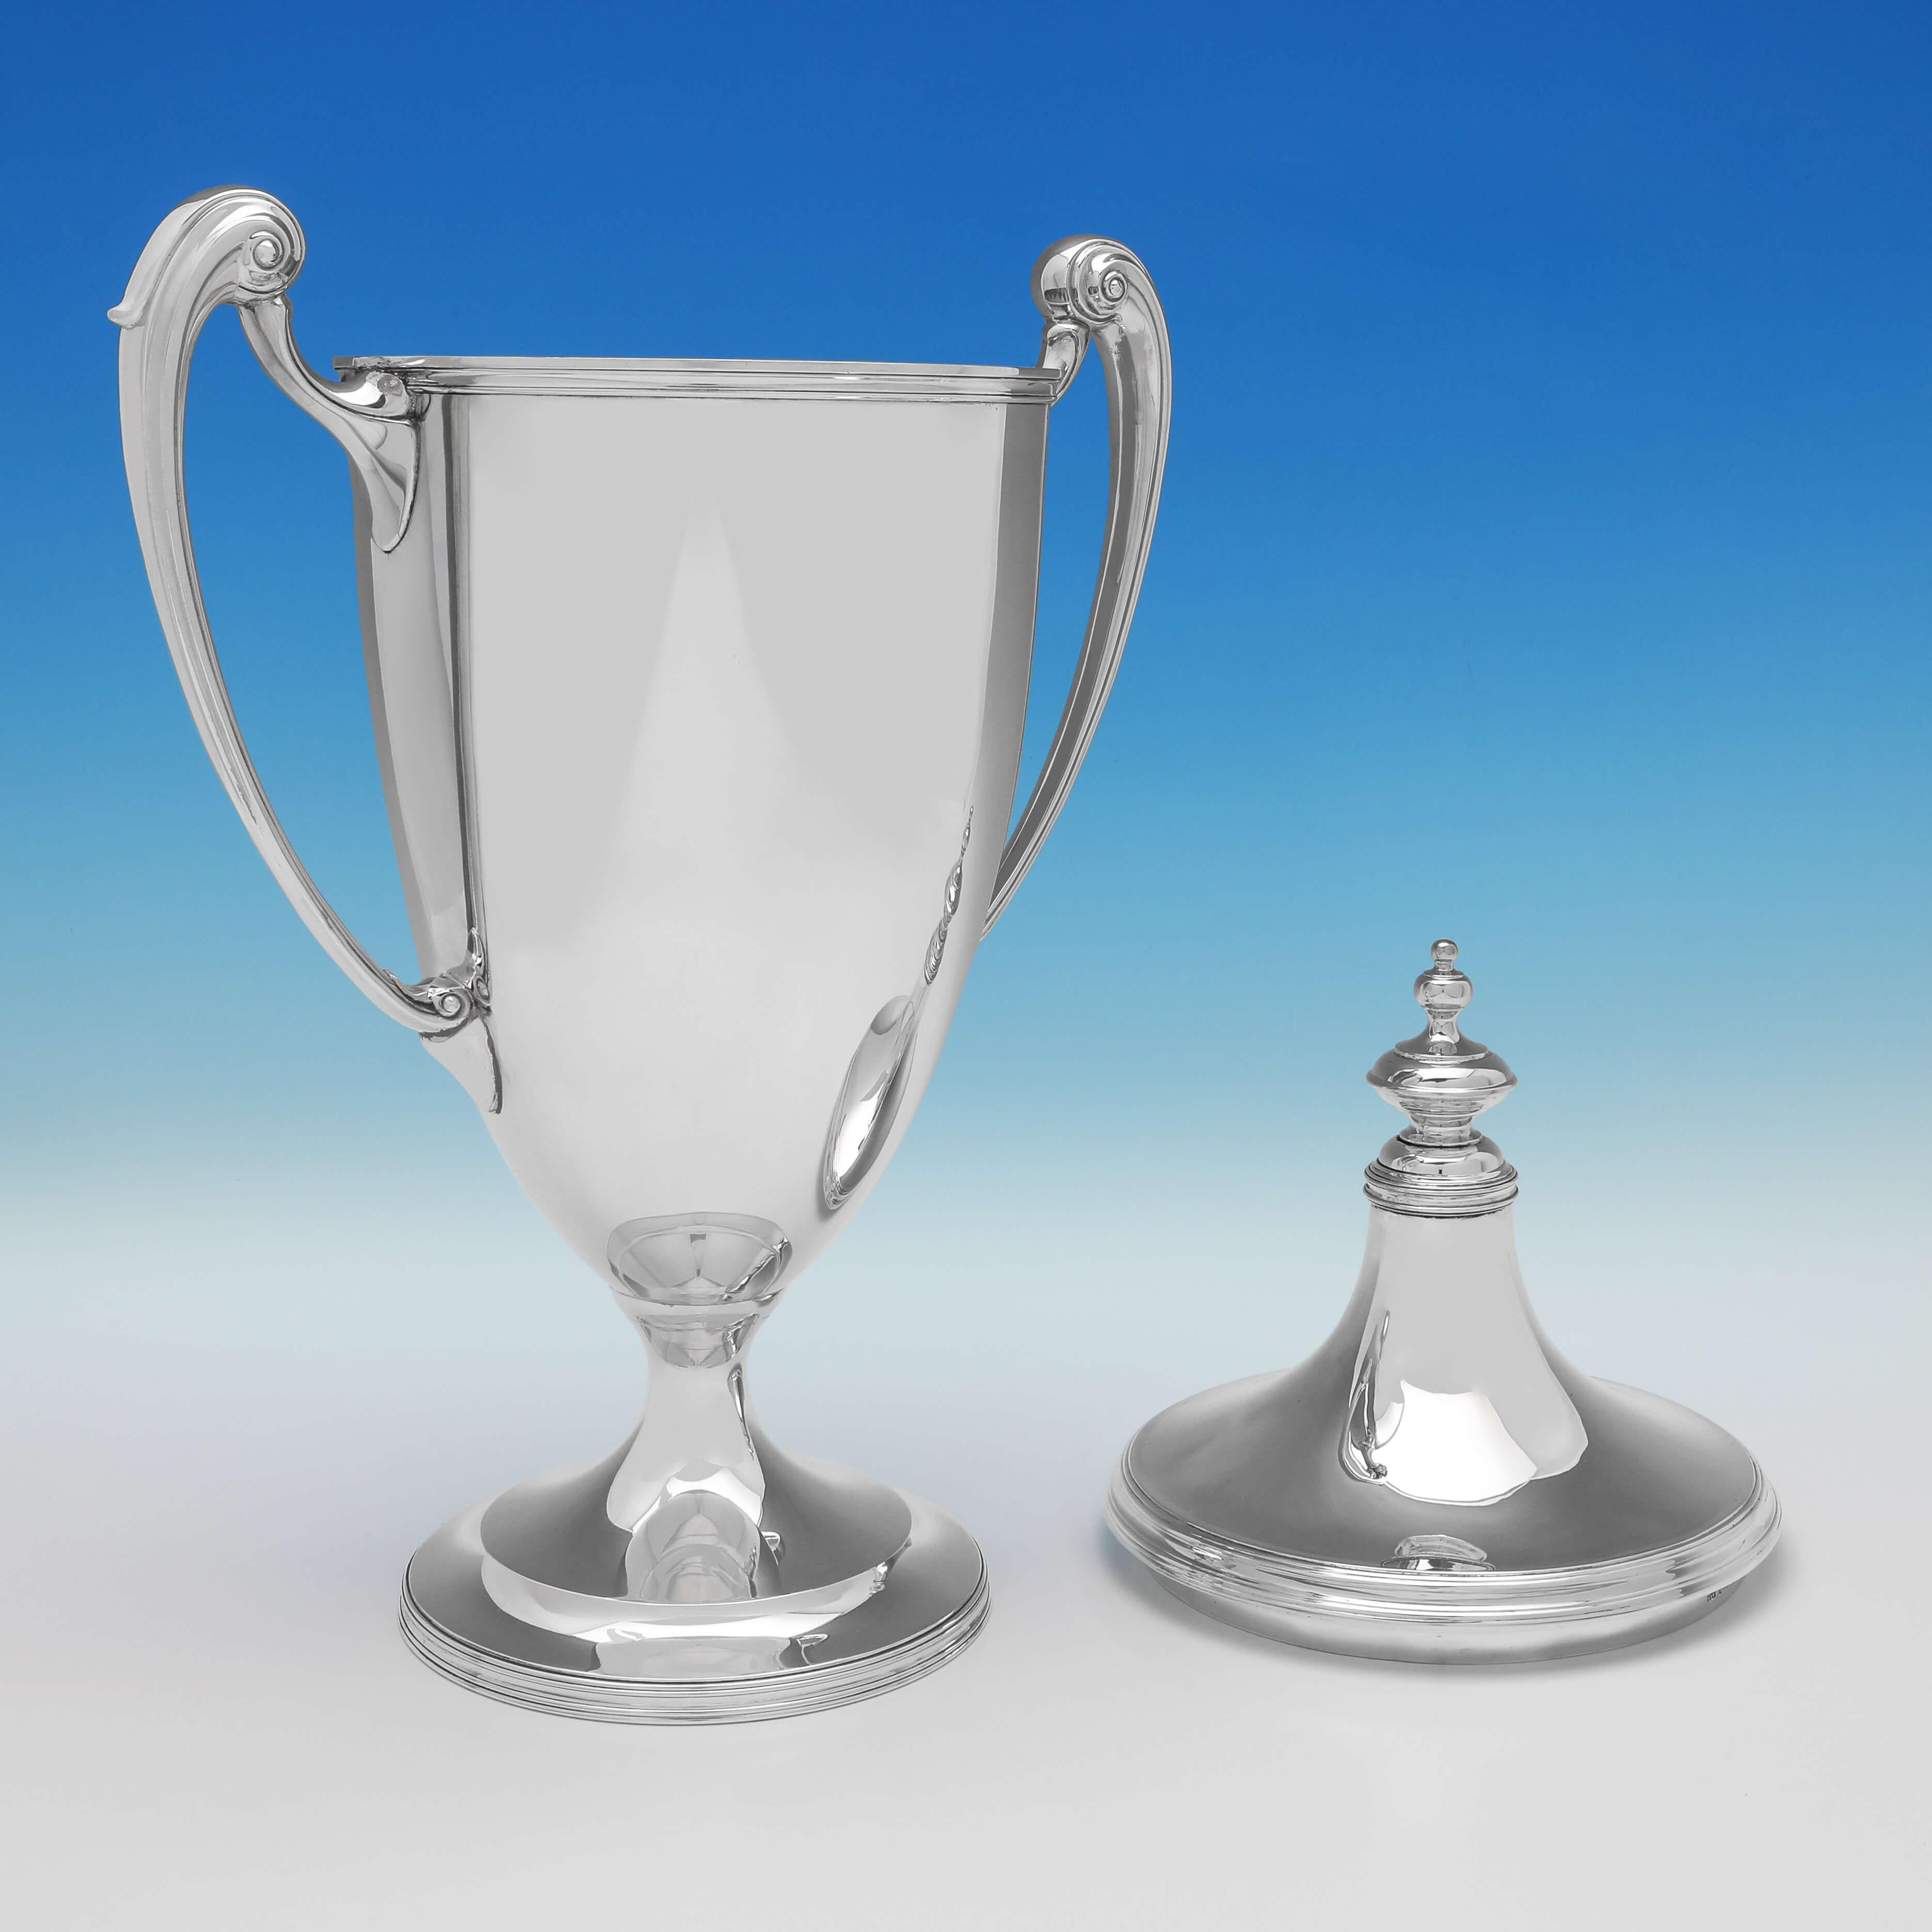 Hallmarked in Sheffield in 1935 by Mappin & Webb, this handsome, sterling silver trophy, is classical in shape, and features acanthus detailing to the handles, and reed borders. The trophy measures 20